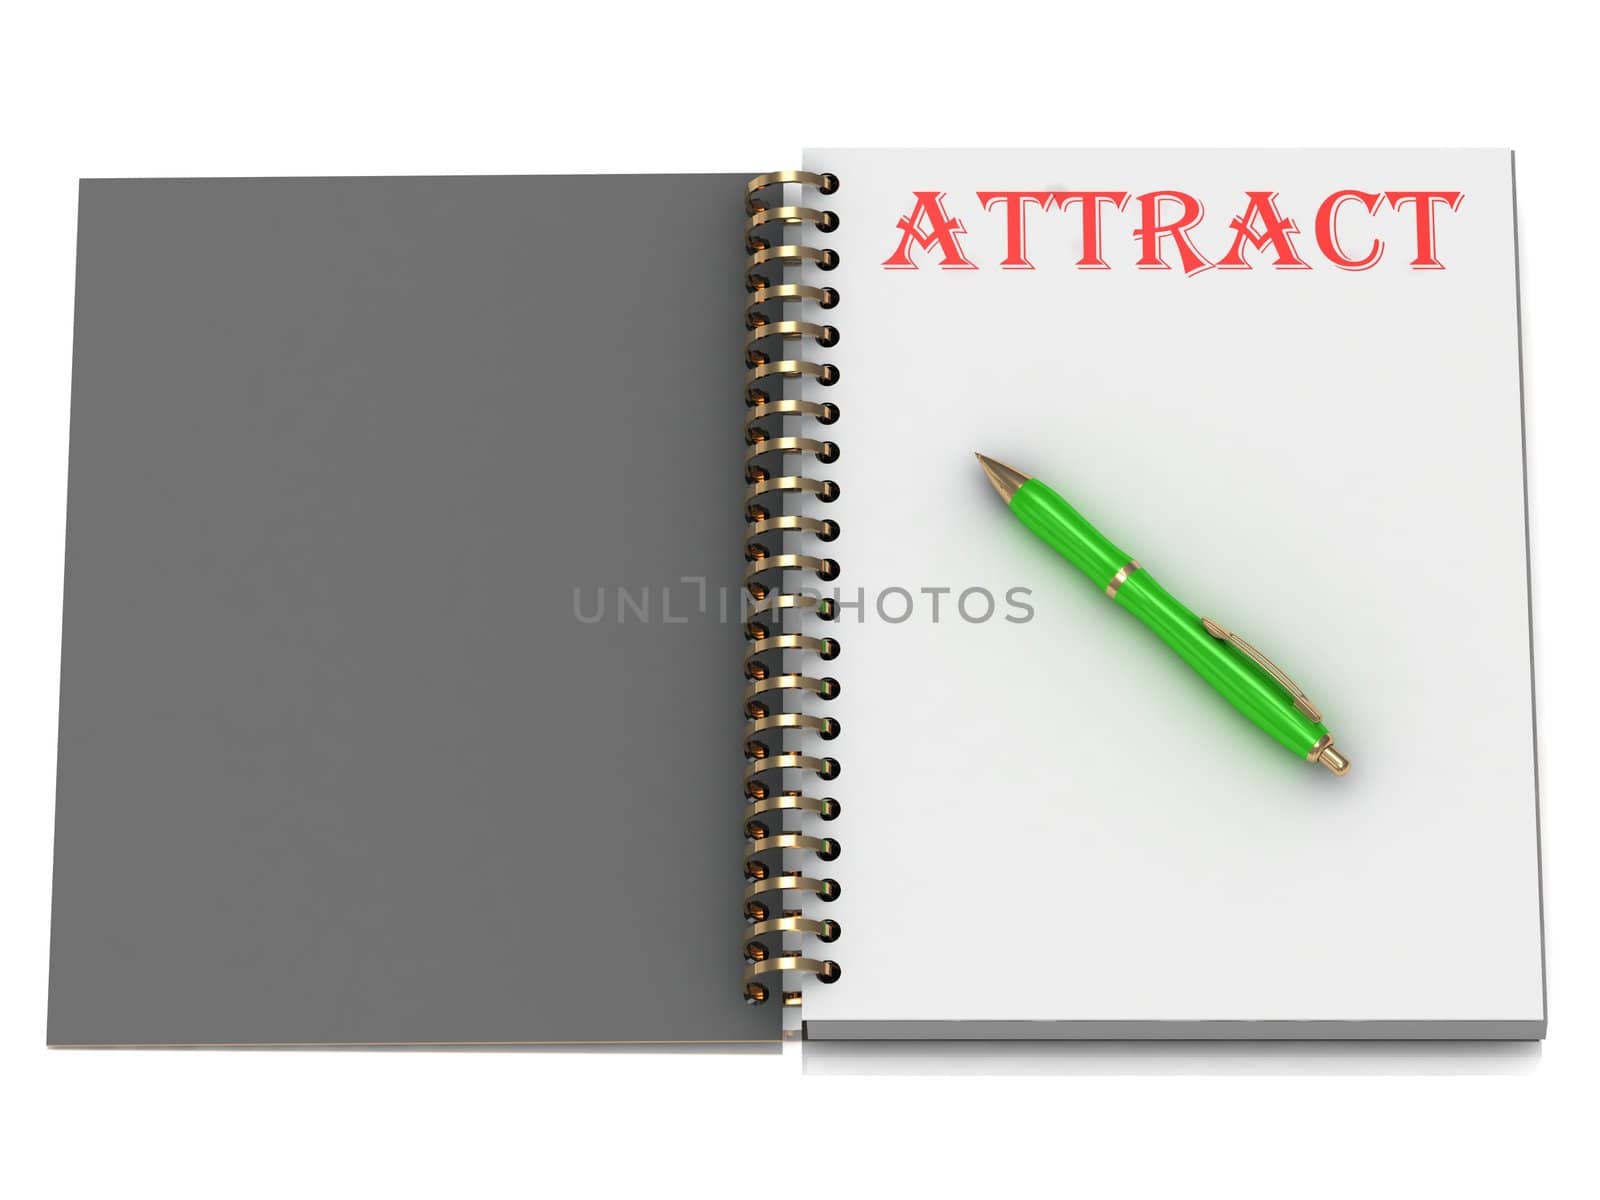 ATTRACT inscription on notebook page and the green handle. 3D illustration isolated on white background